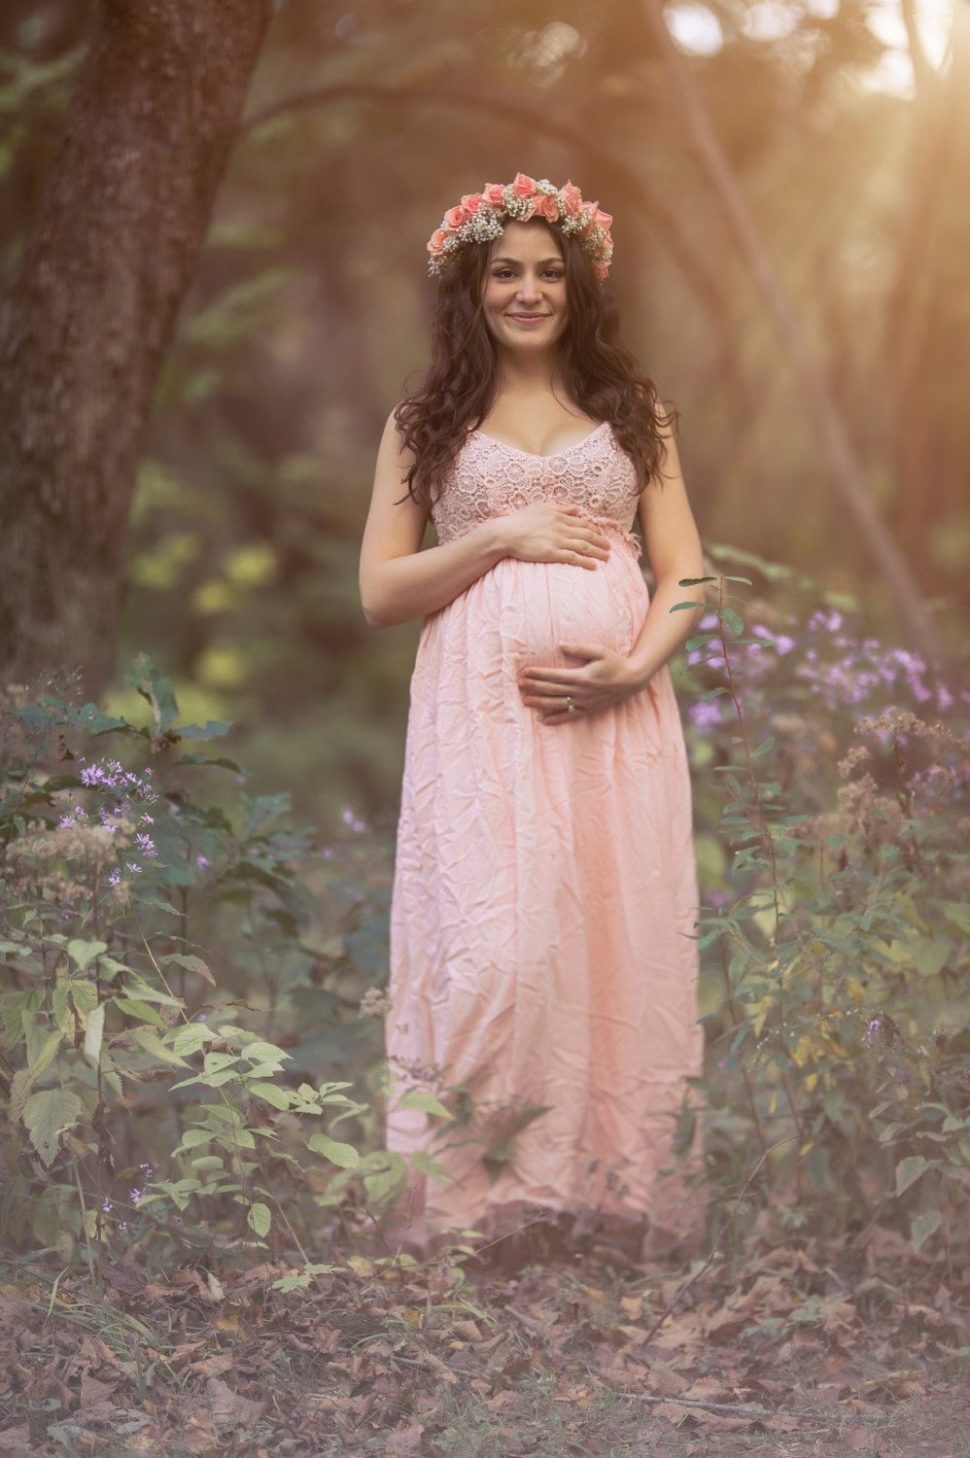 Medium Size of Baby Shower:pink Maternity Dress Maternity Gowns For Photography Maternity Dresses For Baby Shower Mom And Dad Baby Shower Outfits Baby Shower Dresses For Fall Plus Size Maternity Clothes Baby Shower Attire For Mom Maternity Gowns For Photography